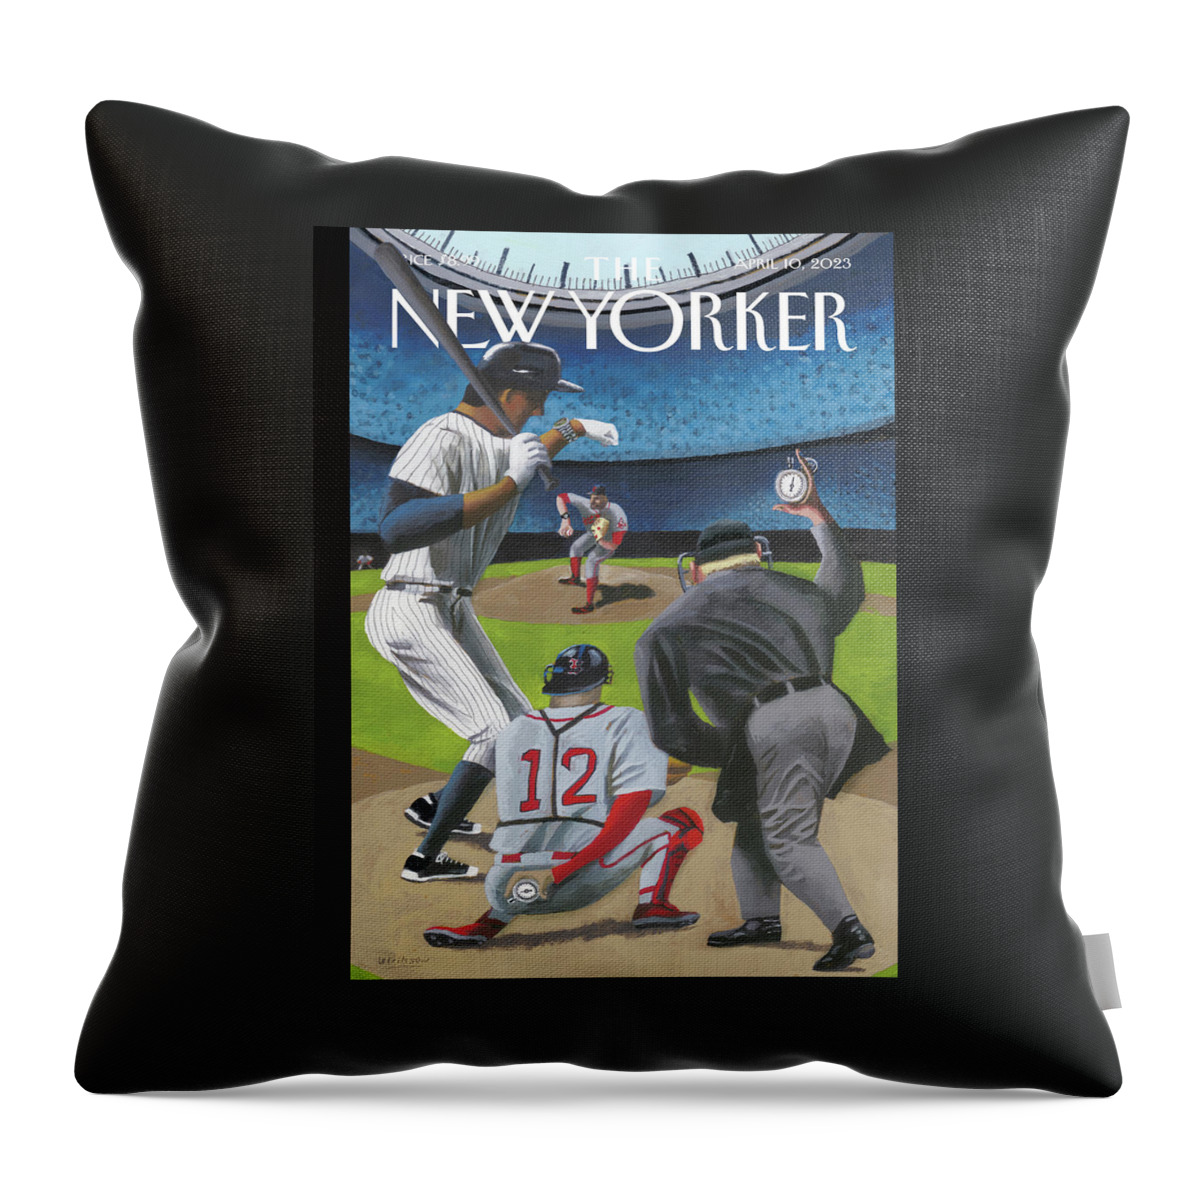 About Time Throw Pillow